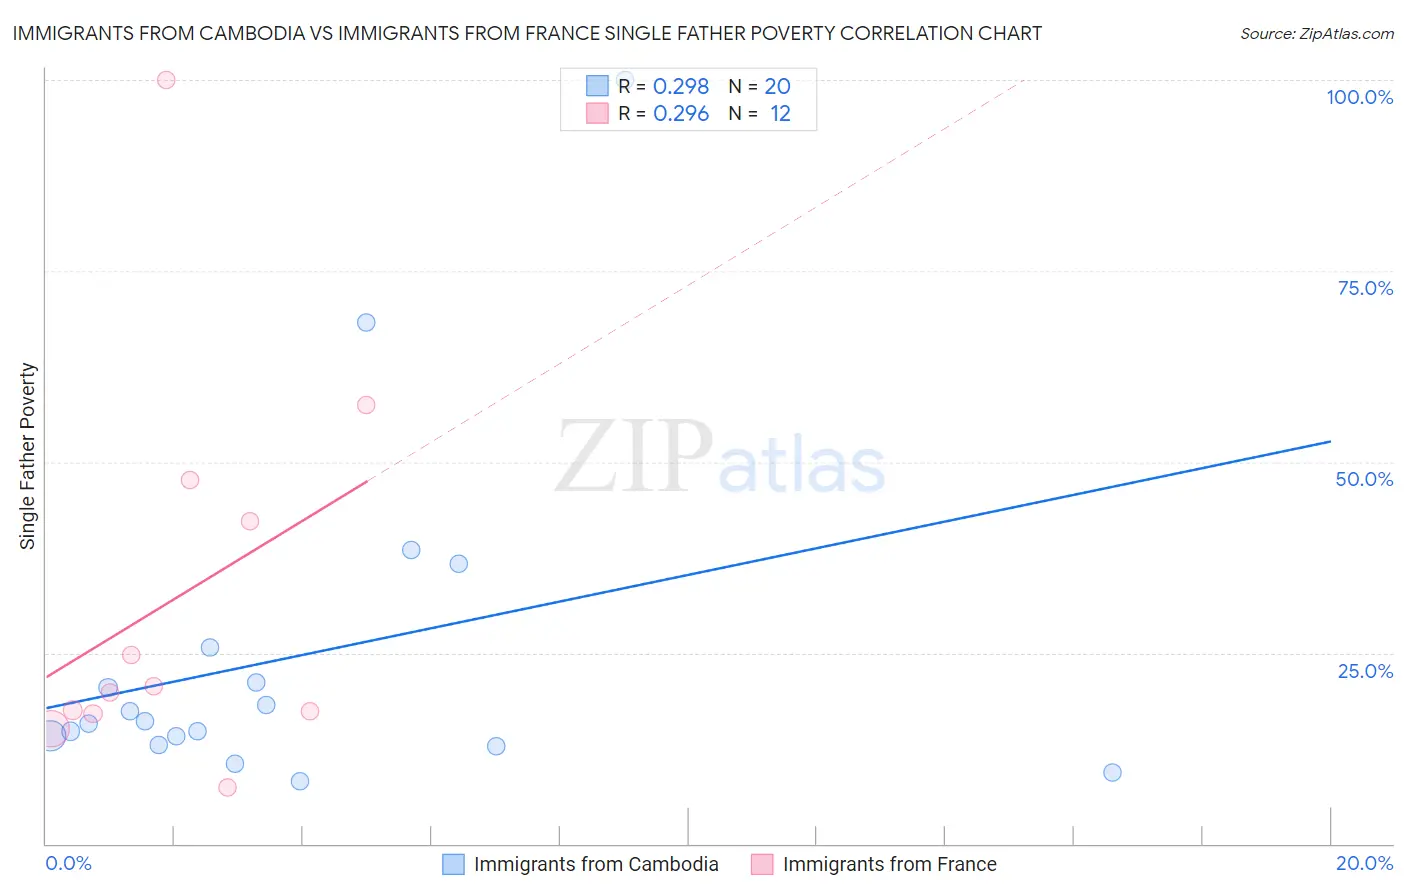 Immigrants from Cambodia vs Immigrants from France Single Father Poverty